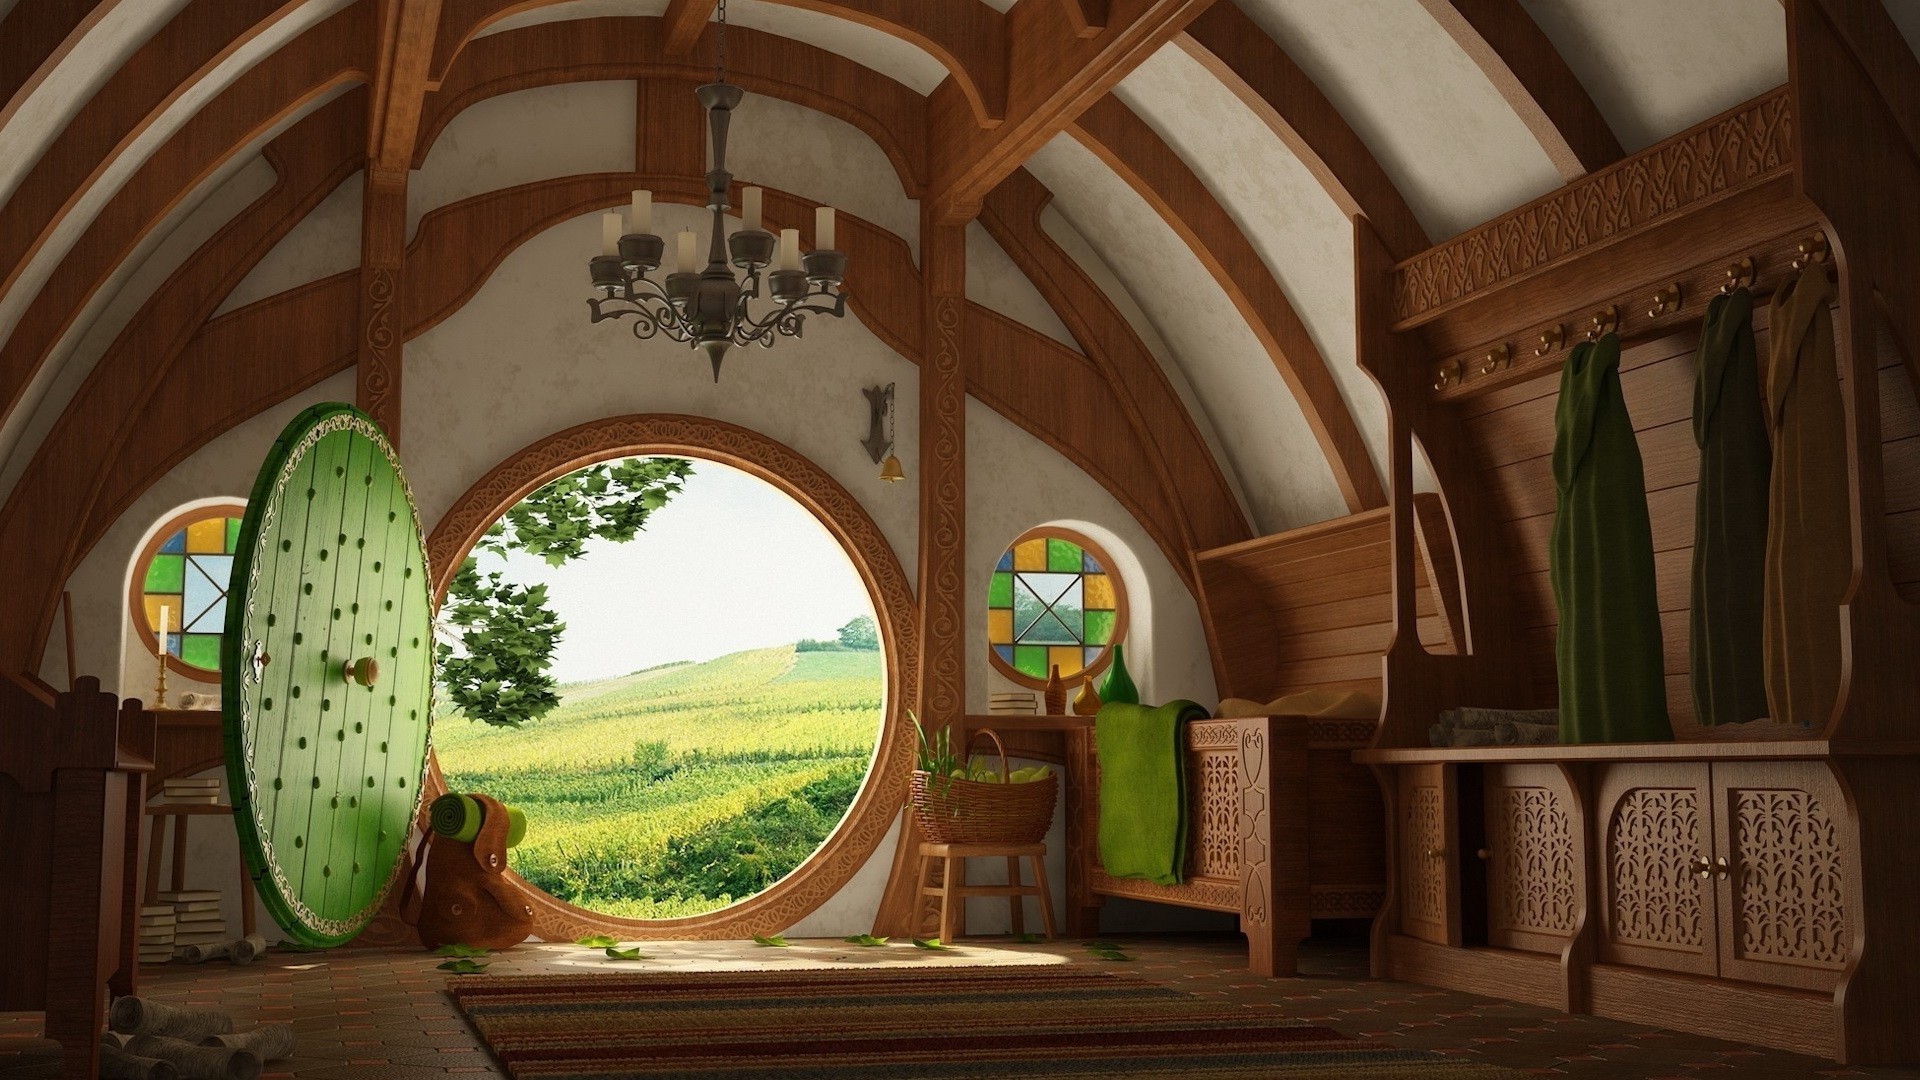 The Lord Of The Rings, Bag End, The Shire, Interiors, House Wallpaper